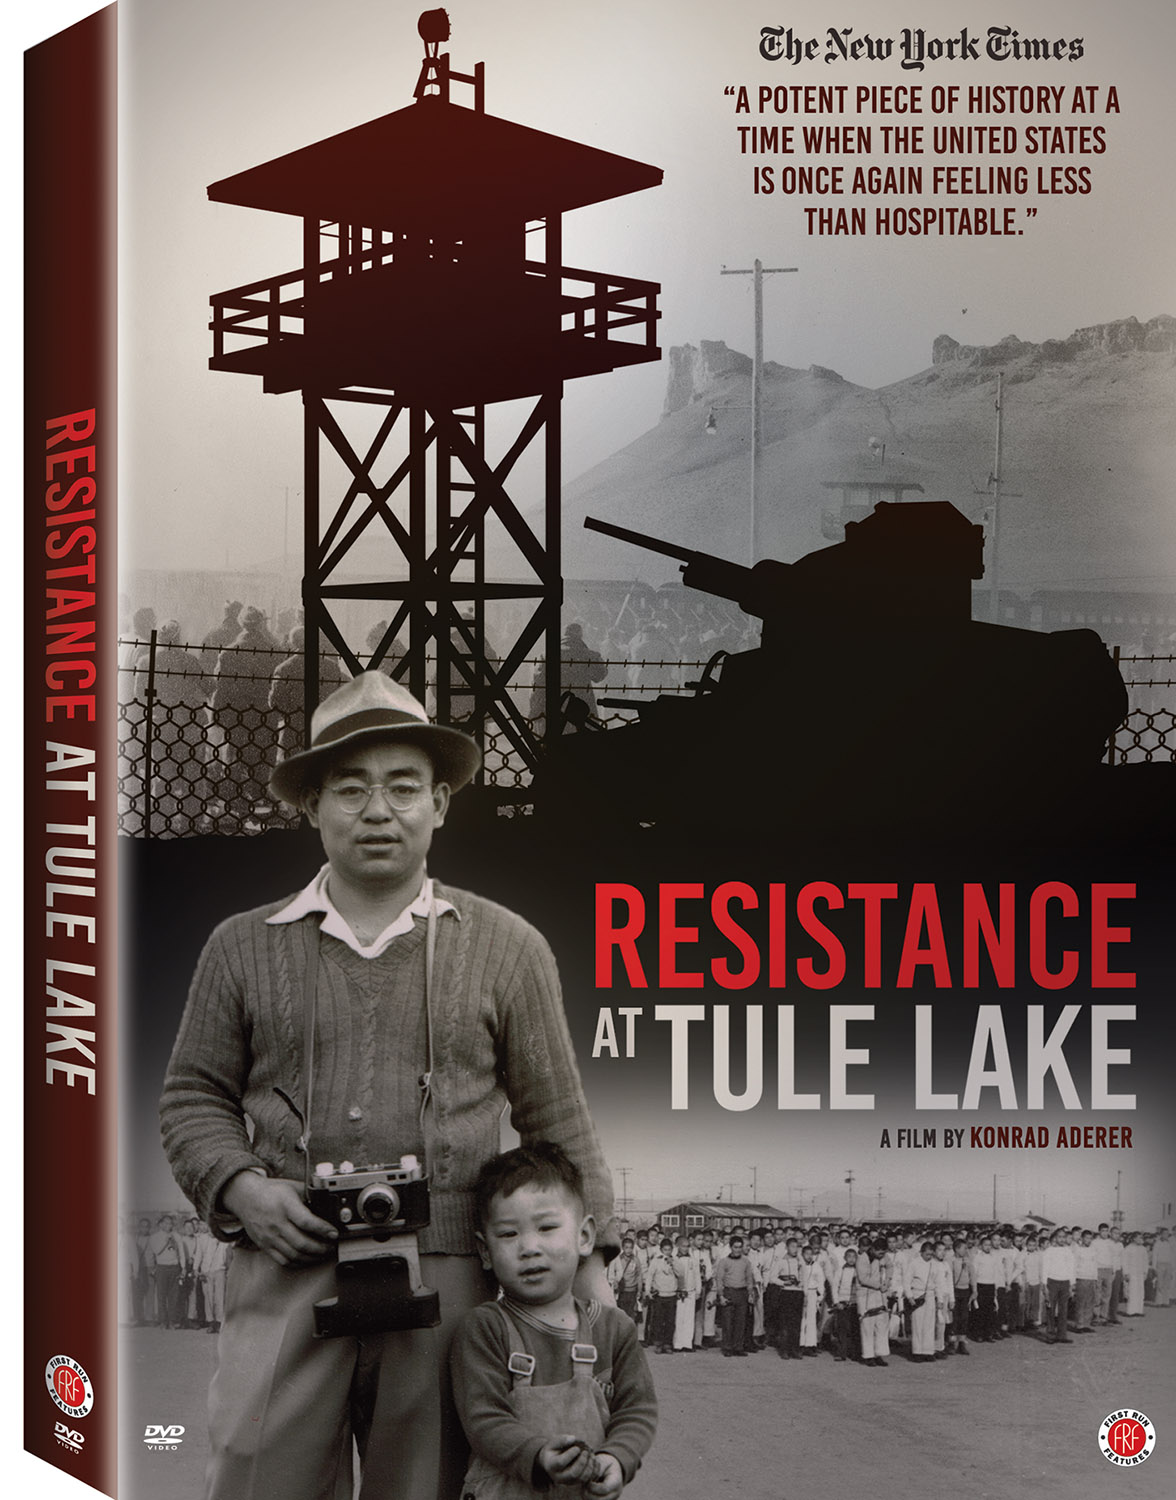 RESISTANCE AT TULE LAKE now available on iTunes and consumer DVD